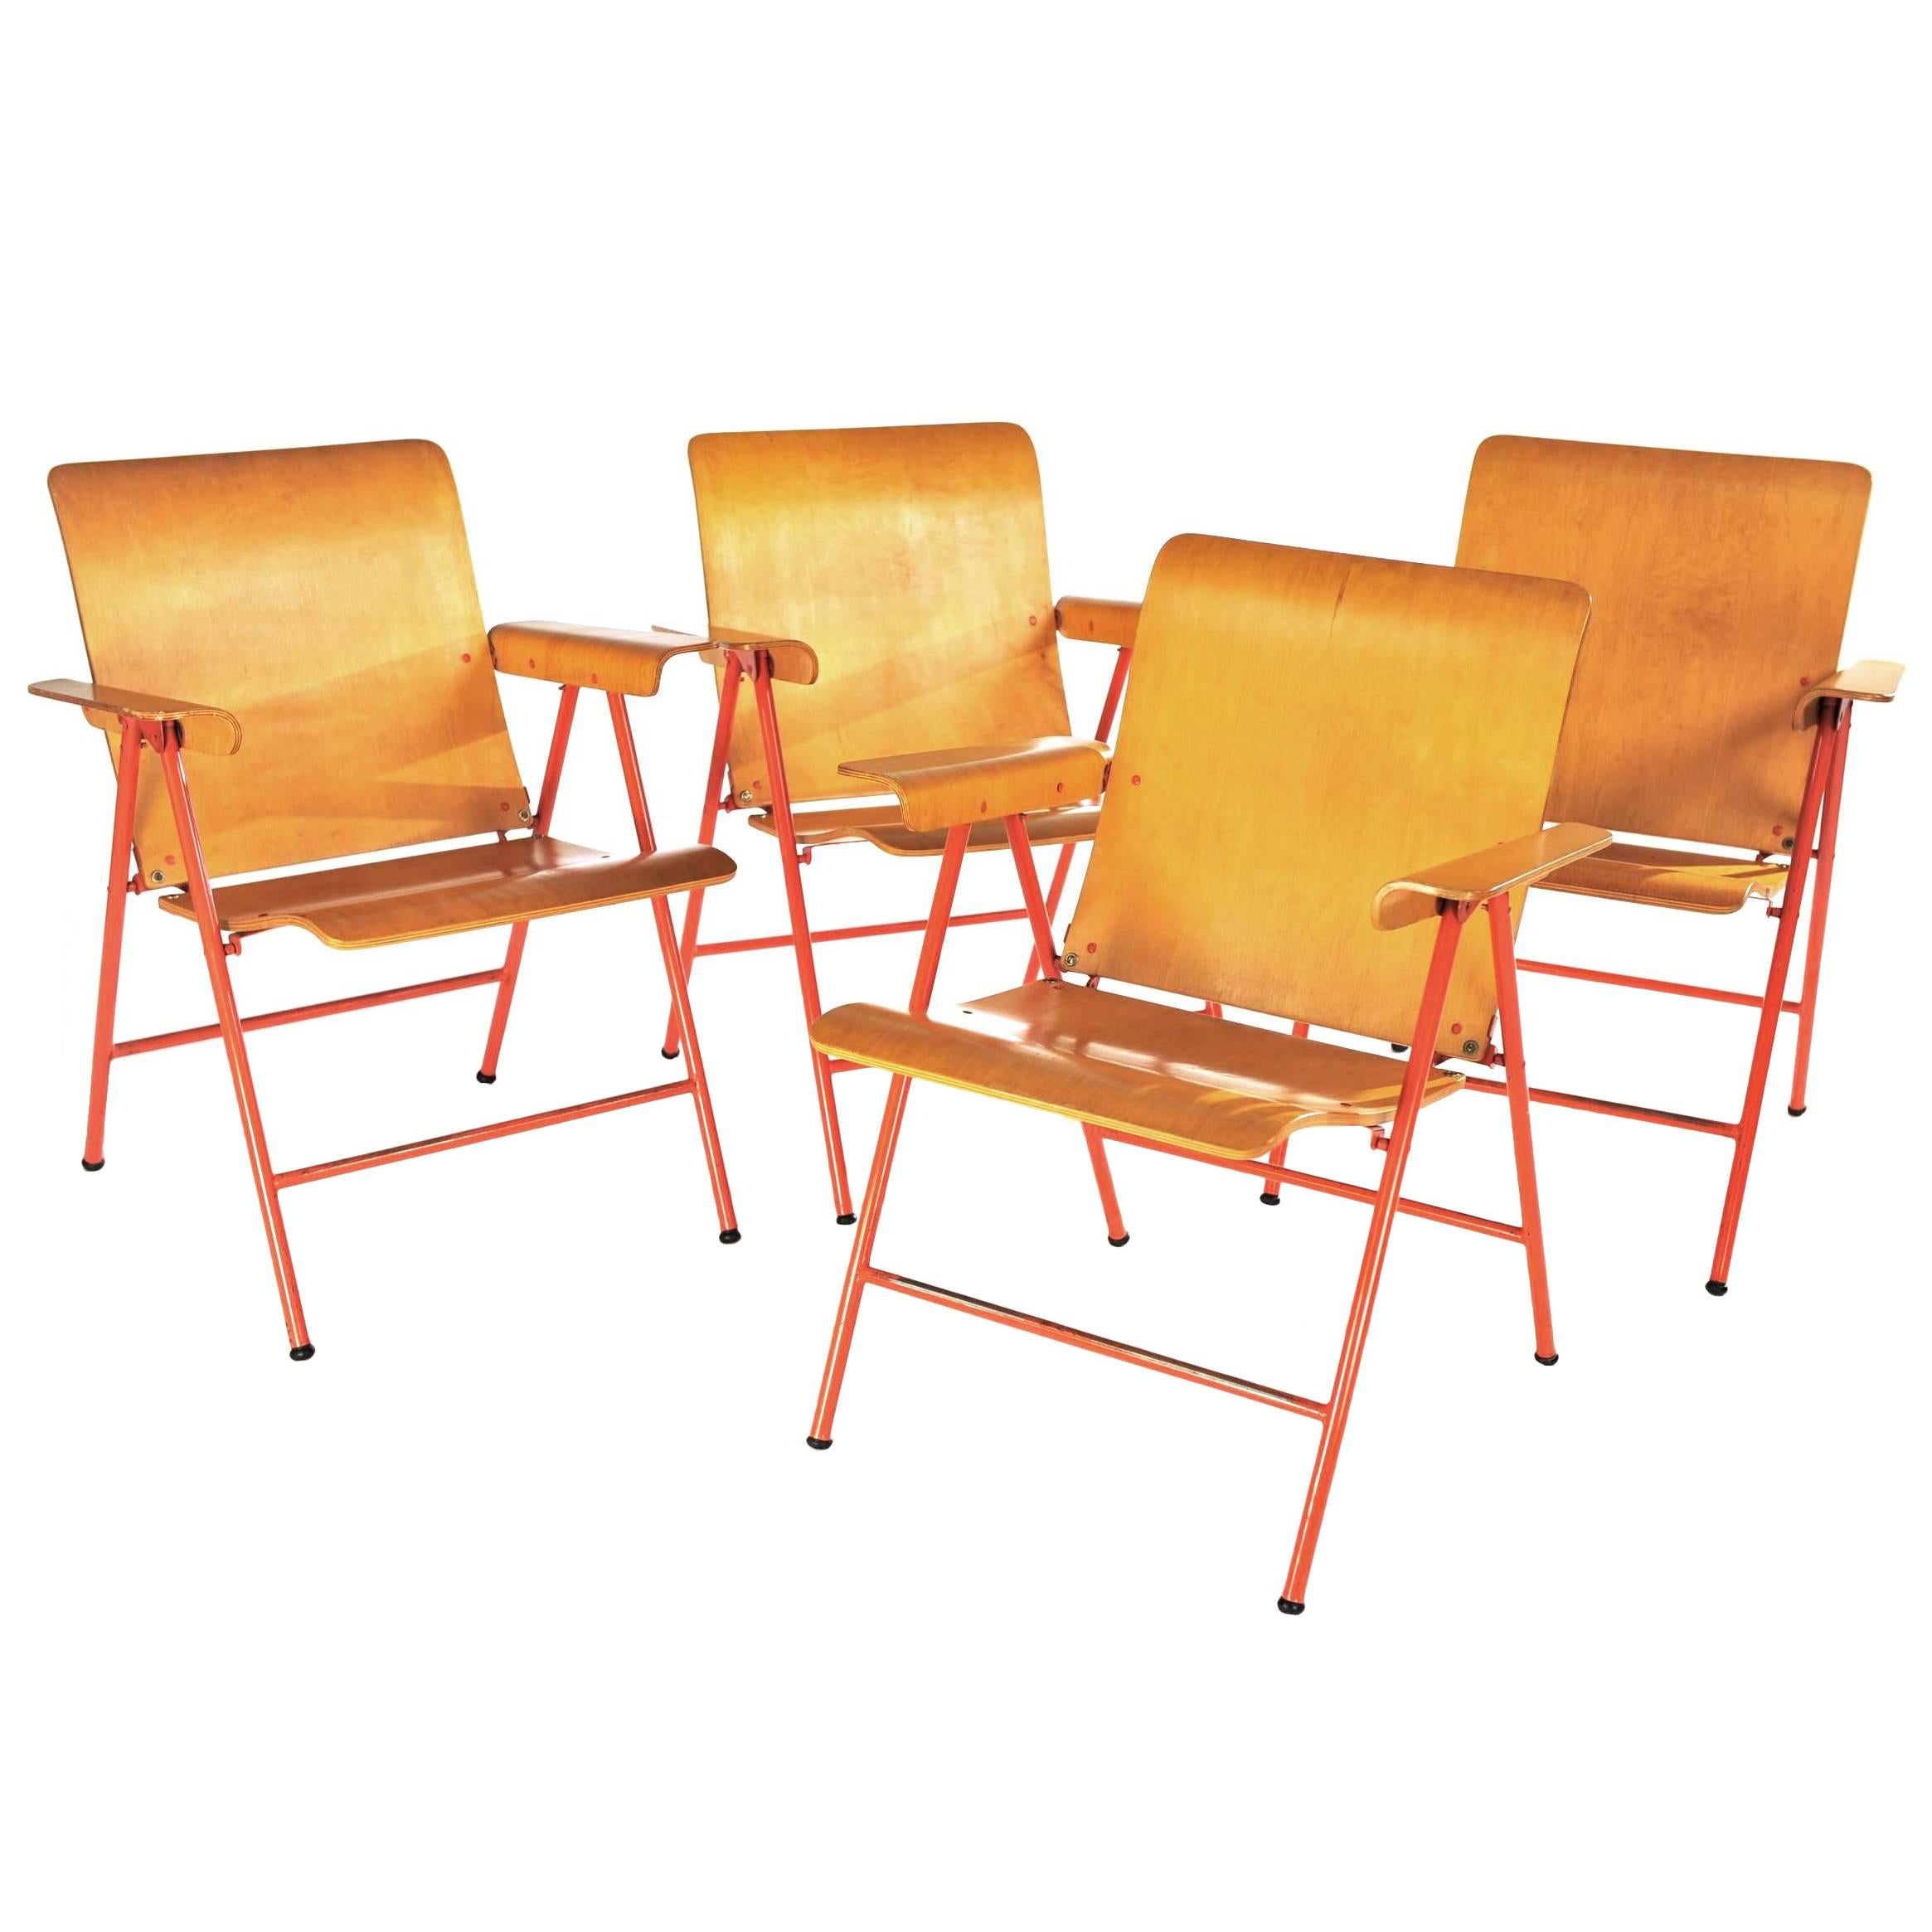 Russel Wright Folding Chairs For Sale